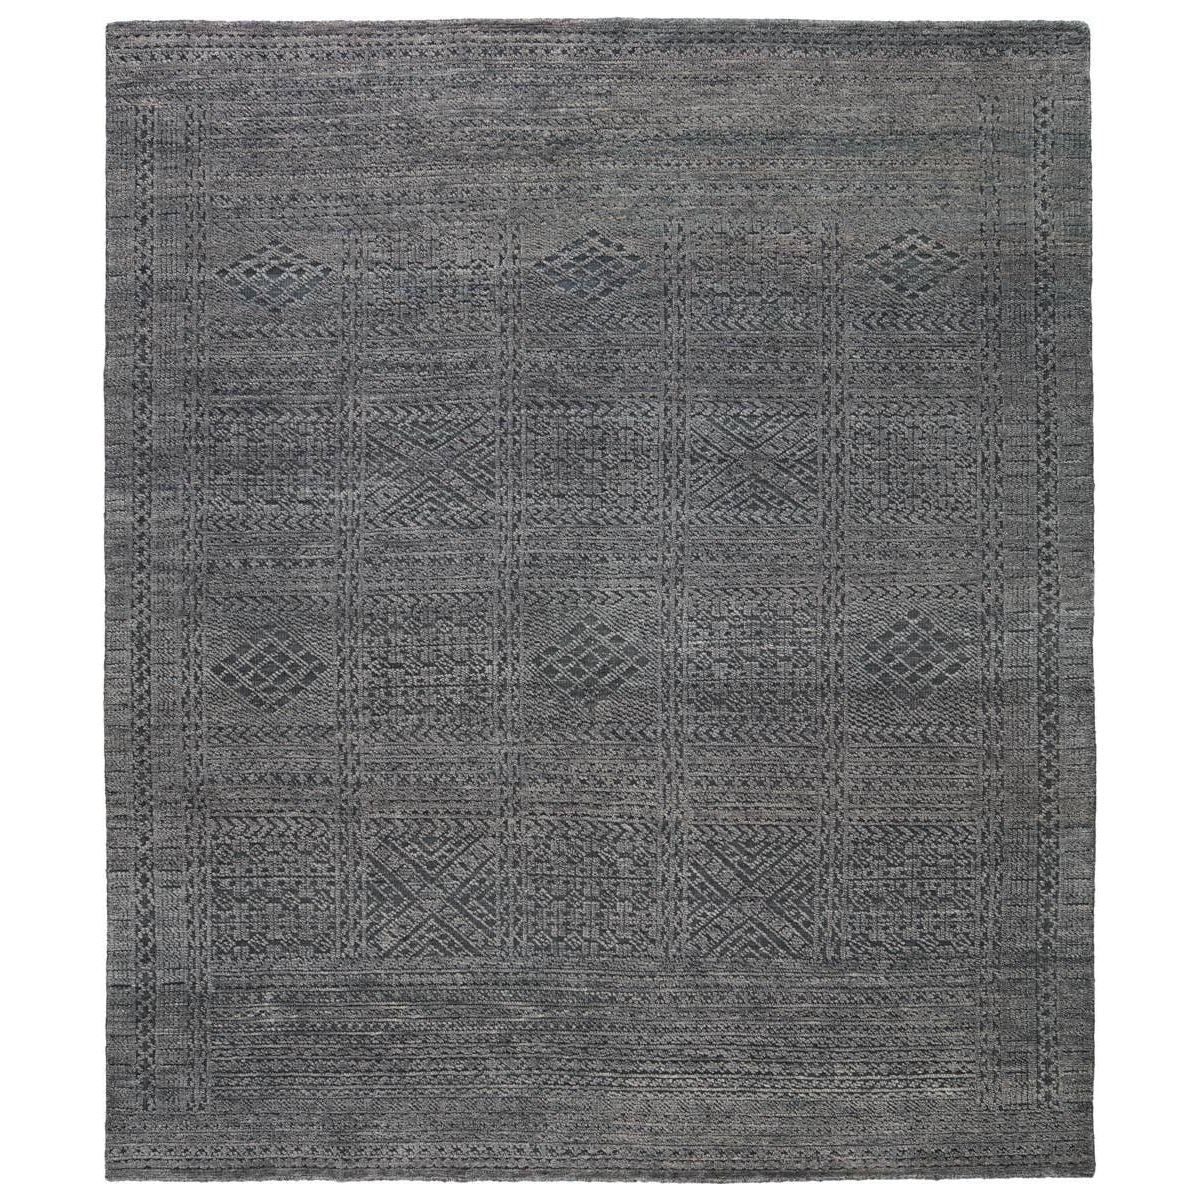 The Reign Jadene Area Rug by Jaipur Living, or REI14, is a knotted area rug grounded by deep black and tonal green hues. The tribal pattern makes a stunning and statement in any space. This artisan-made rug boasts a carved, textural pile that lends depth and dimension to the deep tones of the wool.